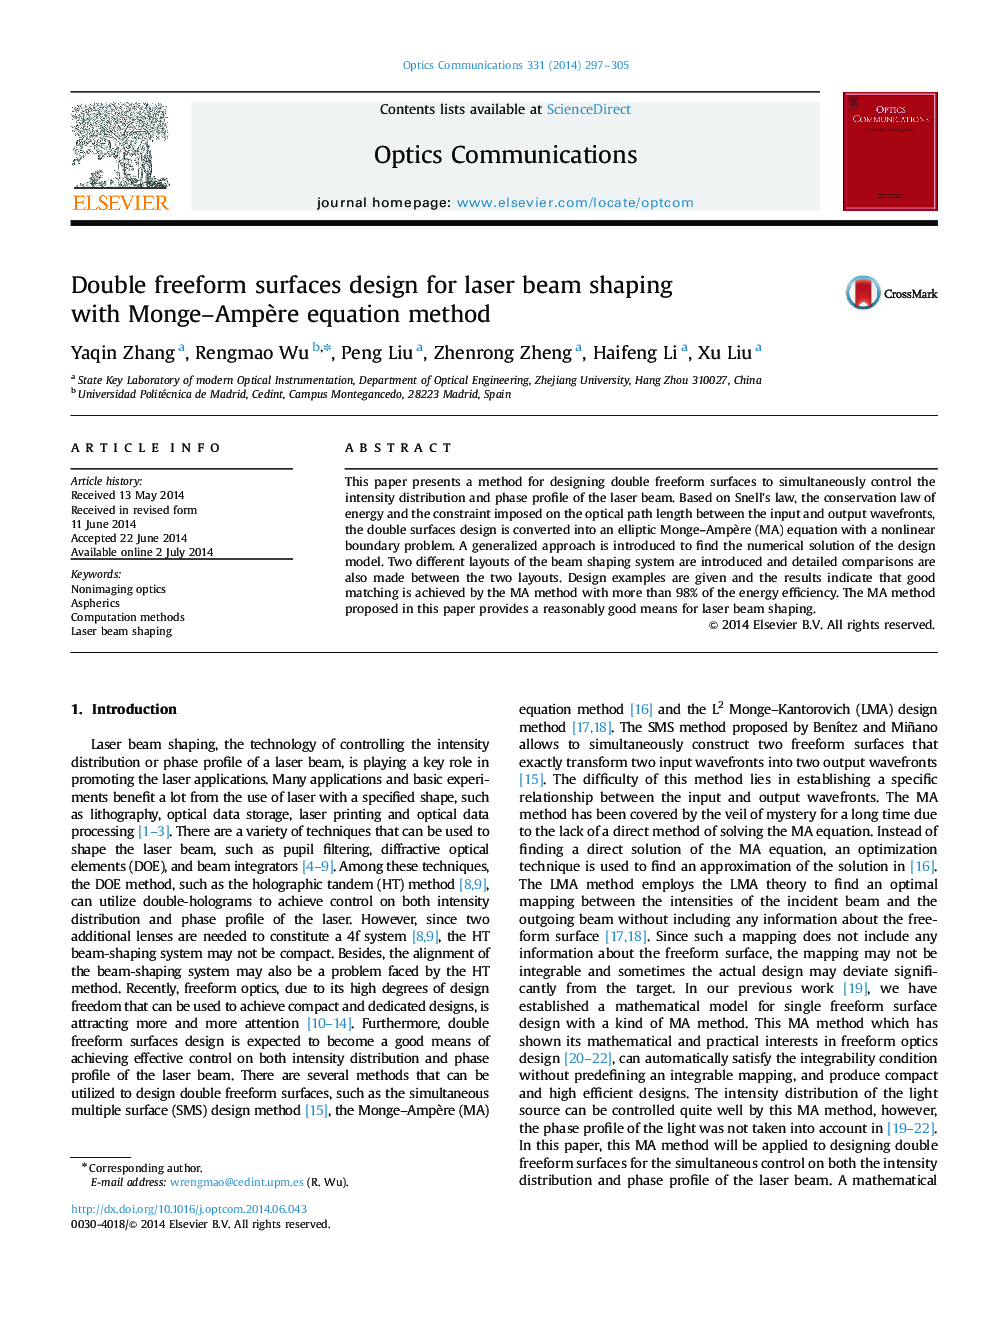 Double freeform surfaces design for laser beam shaping with Monge–Ampère equation method